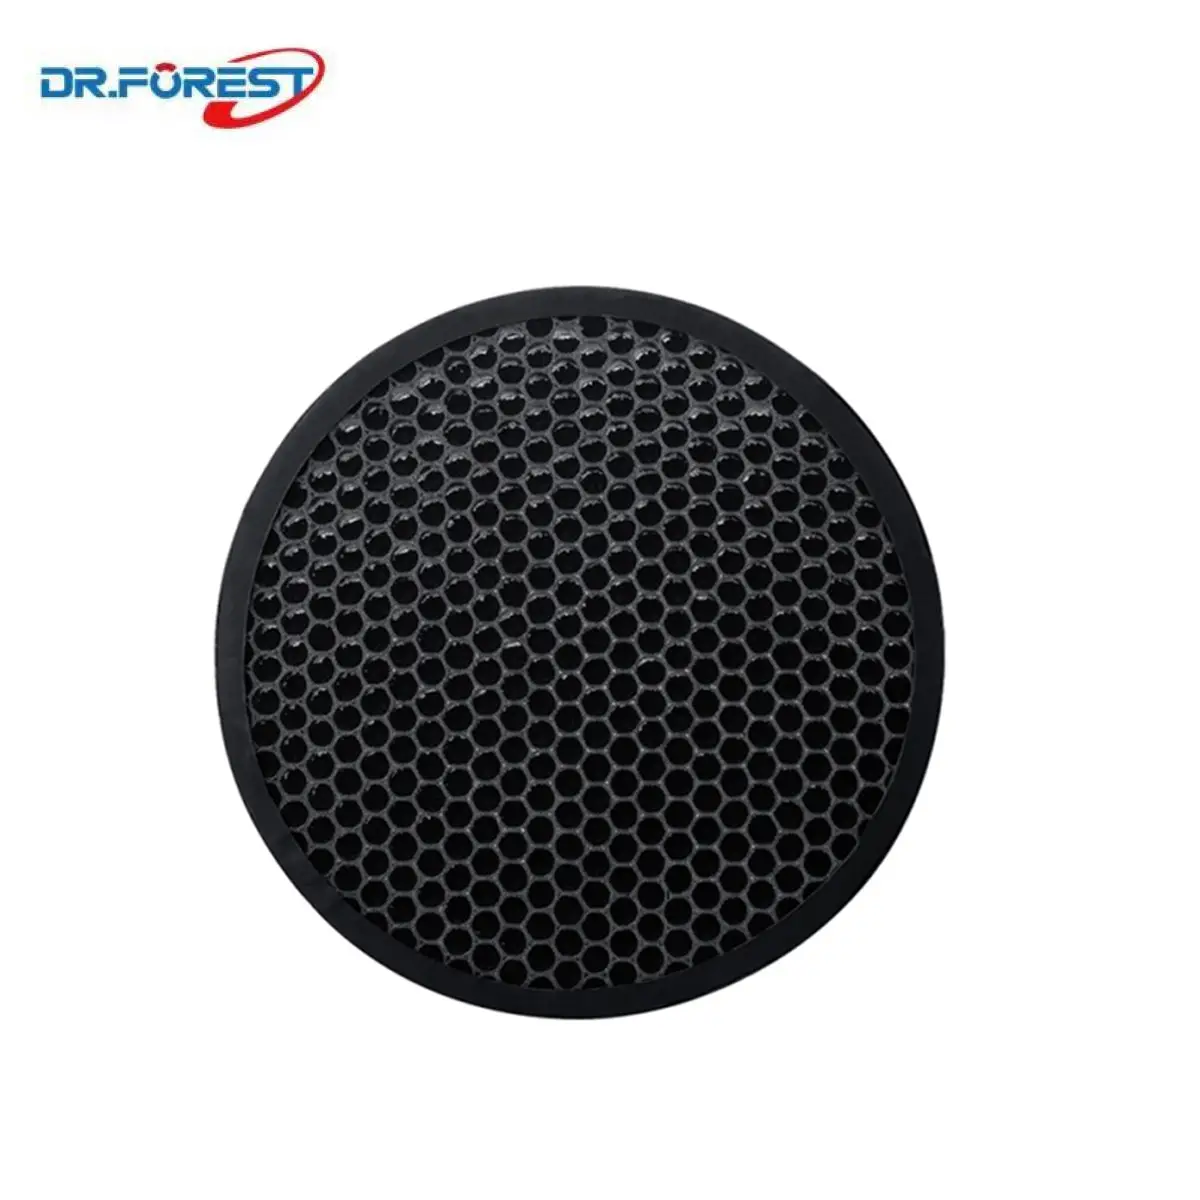 Round shape activated carbon filter purifier filter